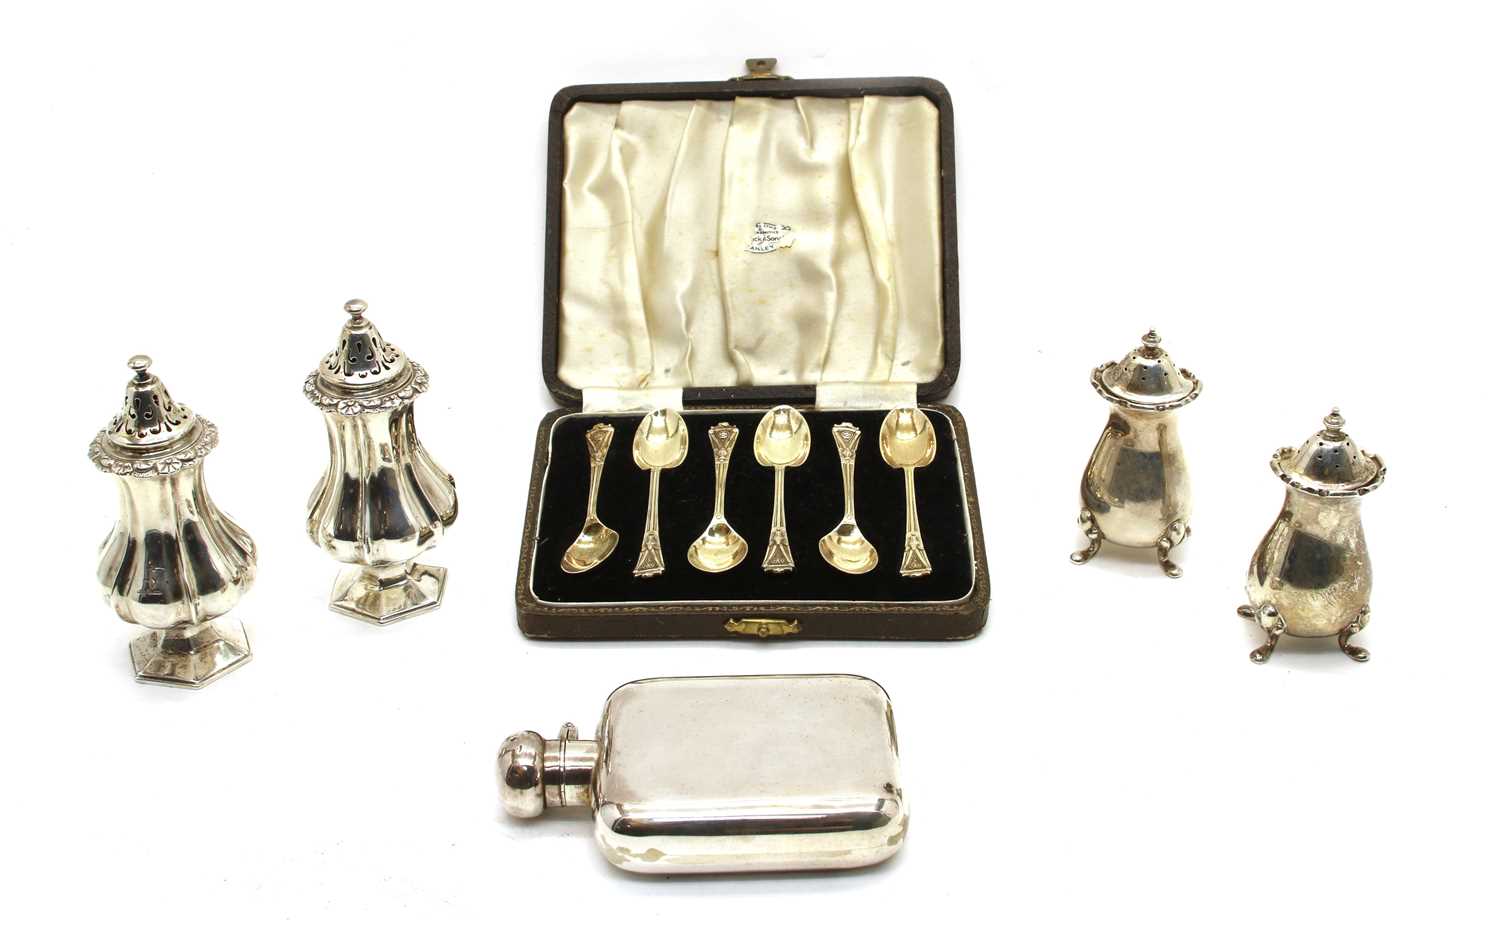 Lot 2 - Silver items